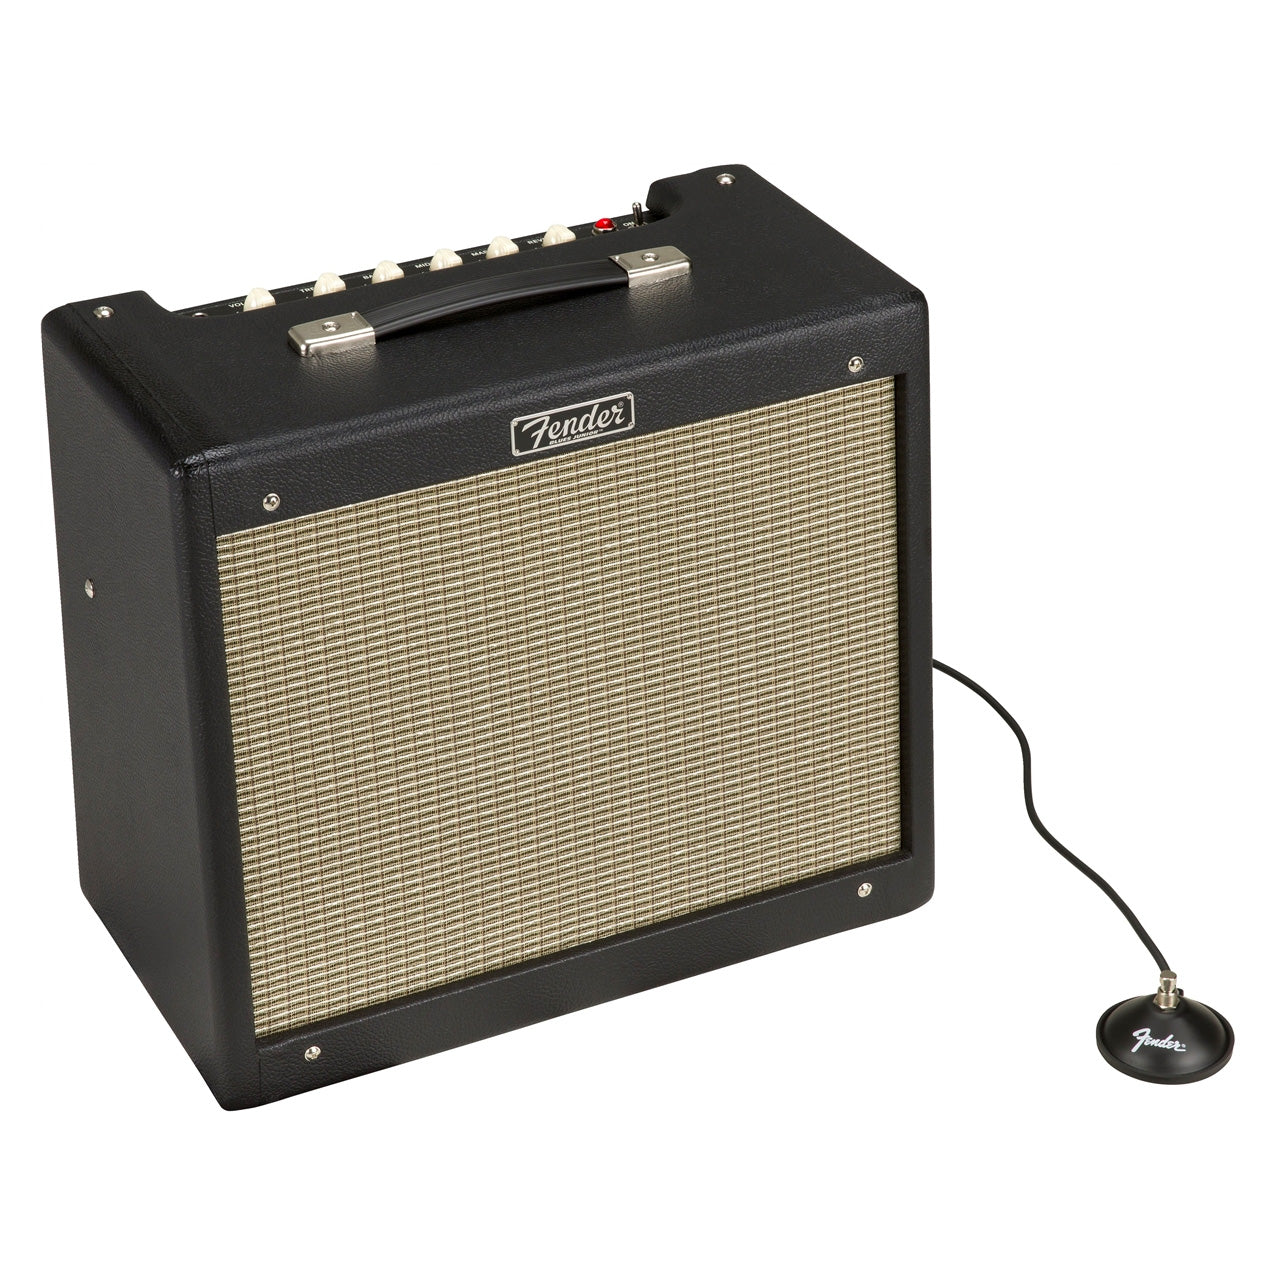 Fender Blues Junior IV, Black. angle, with footswitch